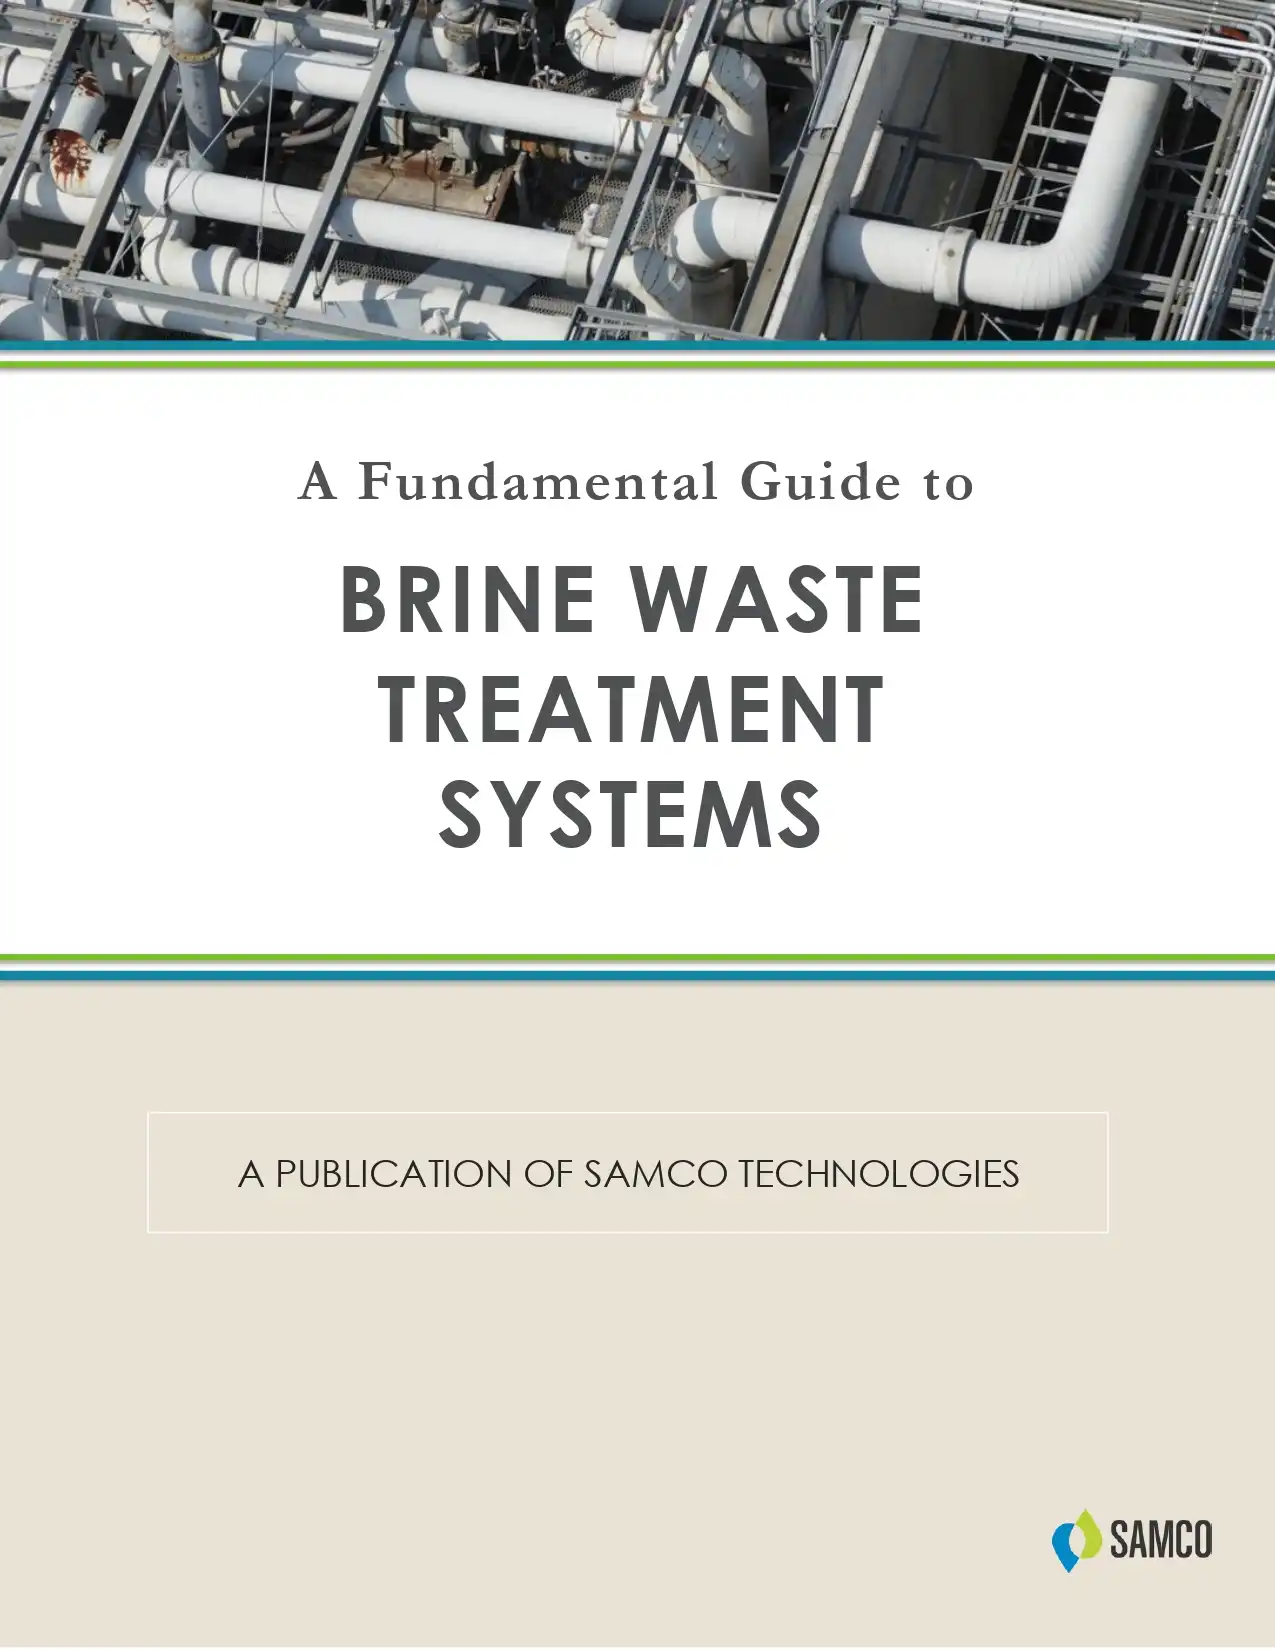 A Fundamental Guide To Brine Waste Treatment Systems